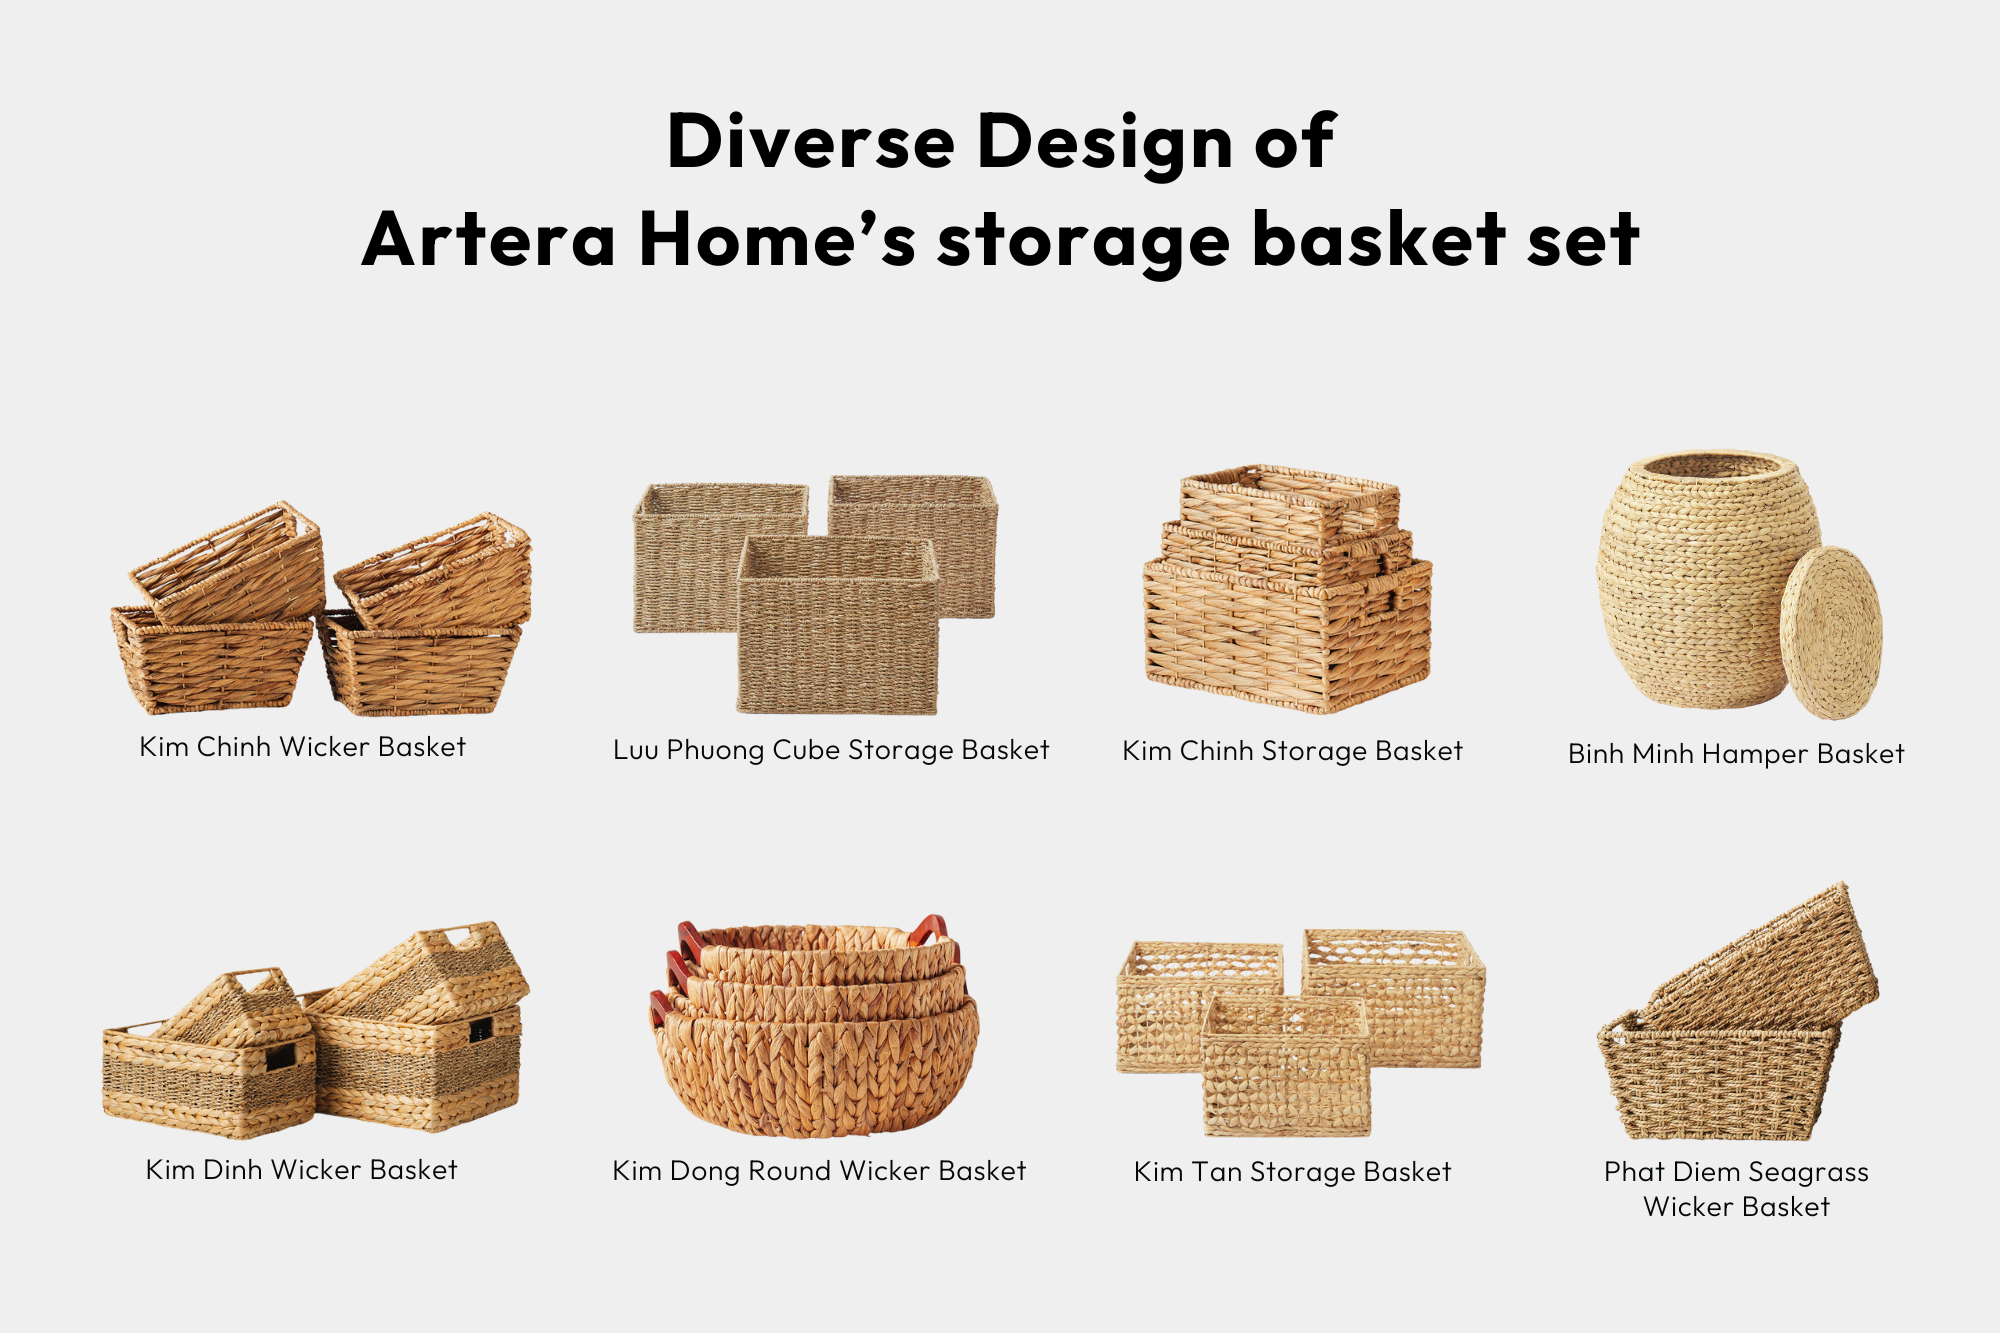 Wholesale storage baskets for interior design projects from Artera Home